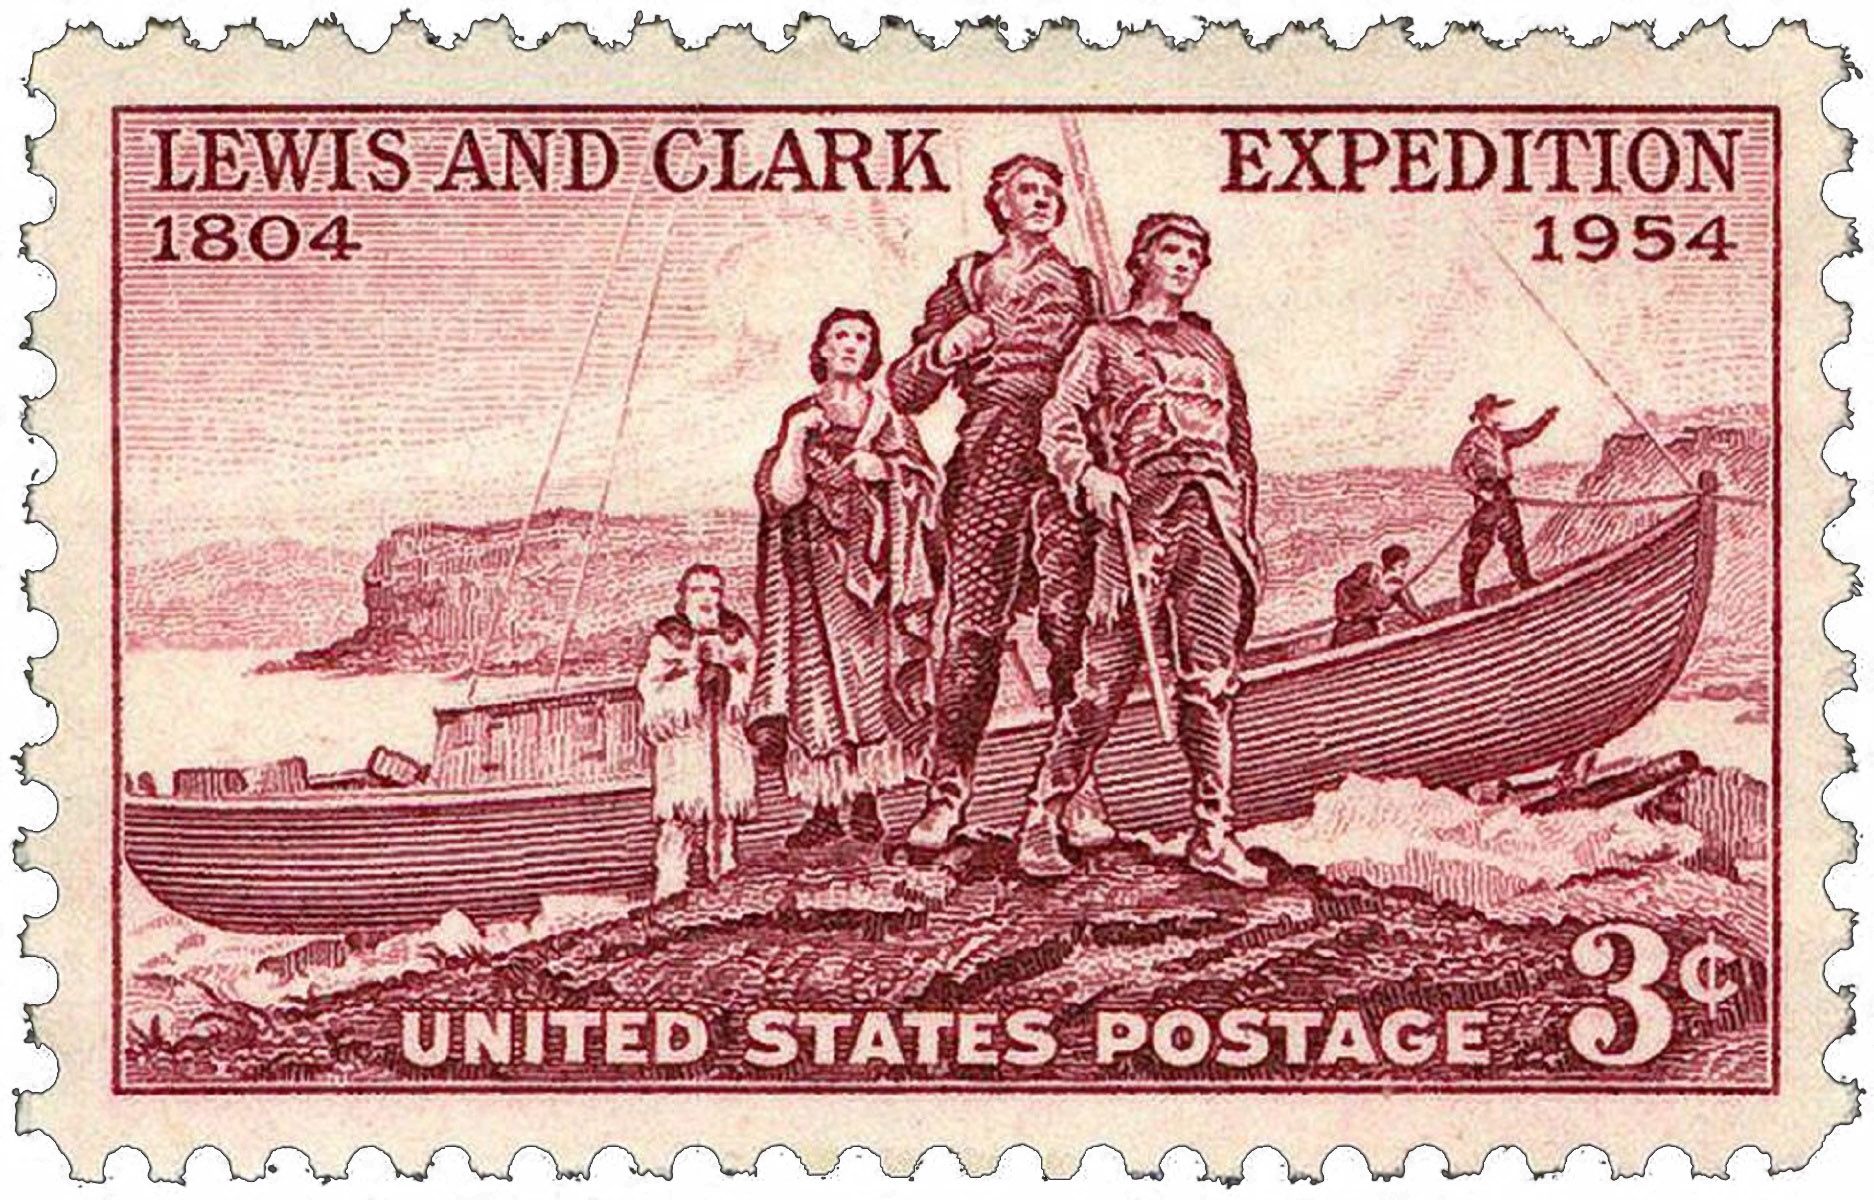 Lewis and Clark stamp depicting return from Pacific